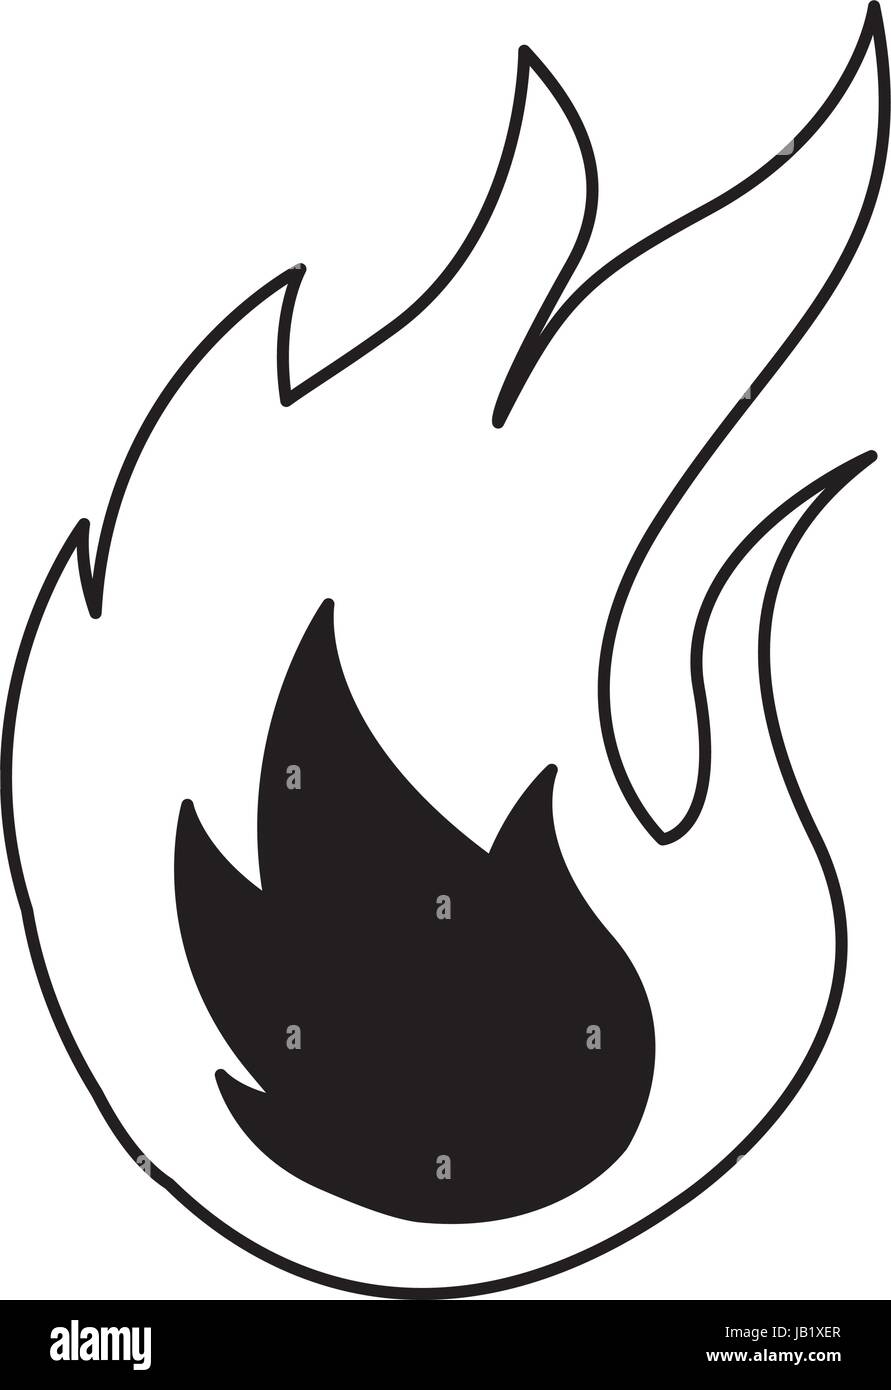 fire flame signal icon Stock Vector